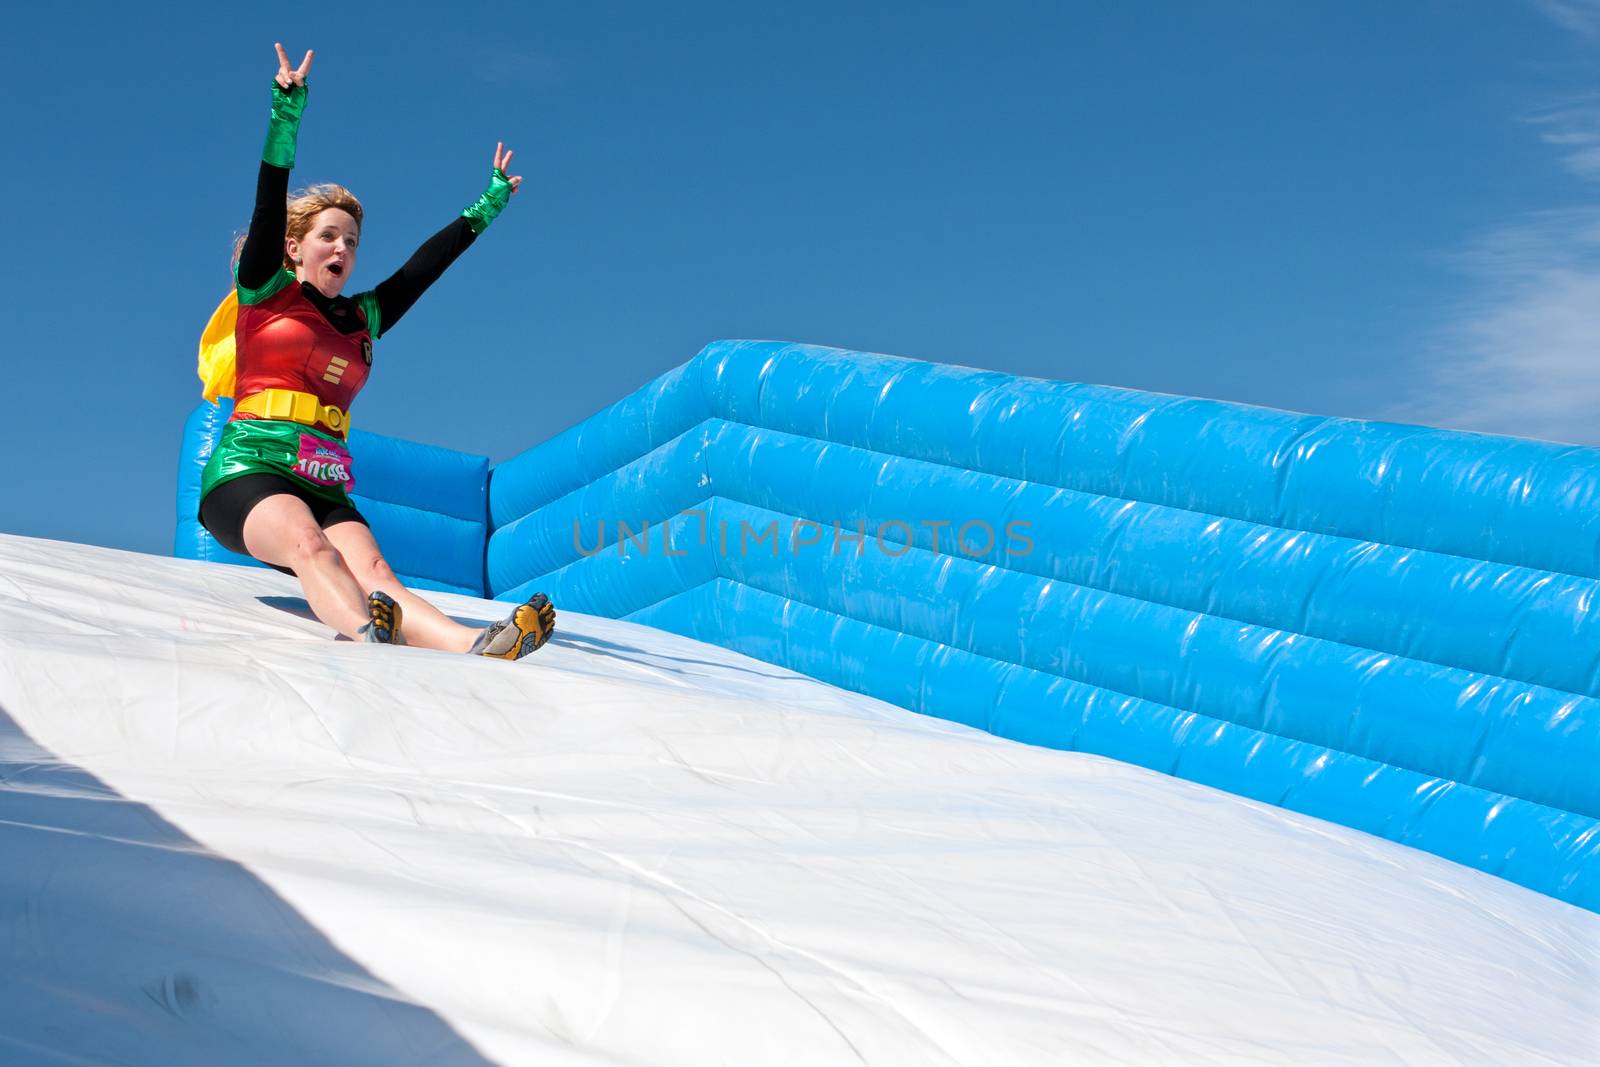 Atlanta, GA, USA - April 5, 2014:  A young woman wearing a Robin superhero costume enjoys sliding down a  plastic slide in the Ridiculous Obstacle Challenge (ROC) 5K race.